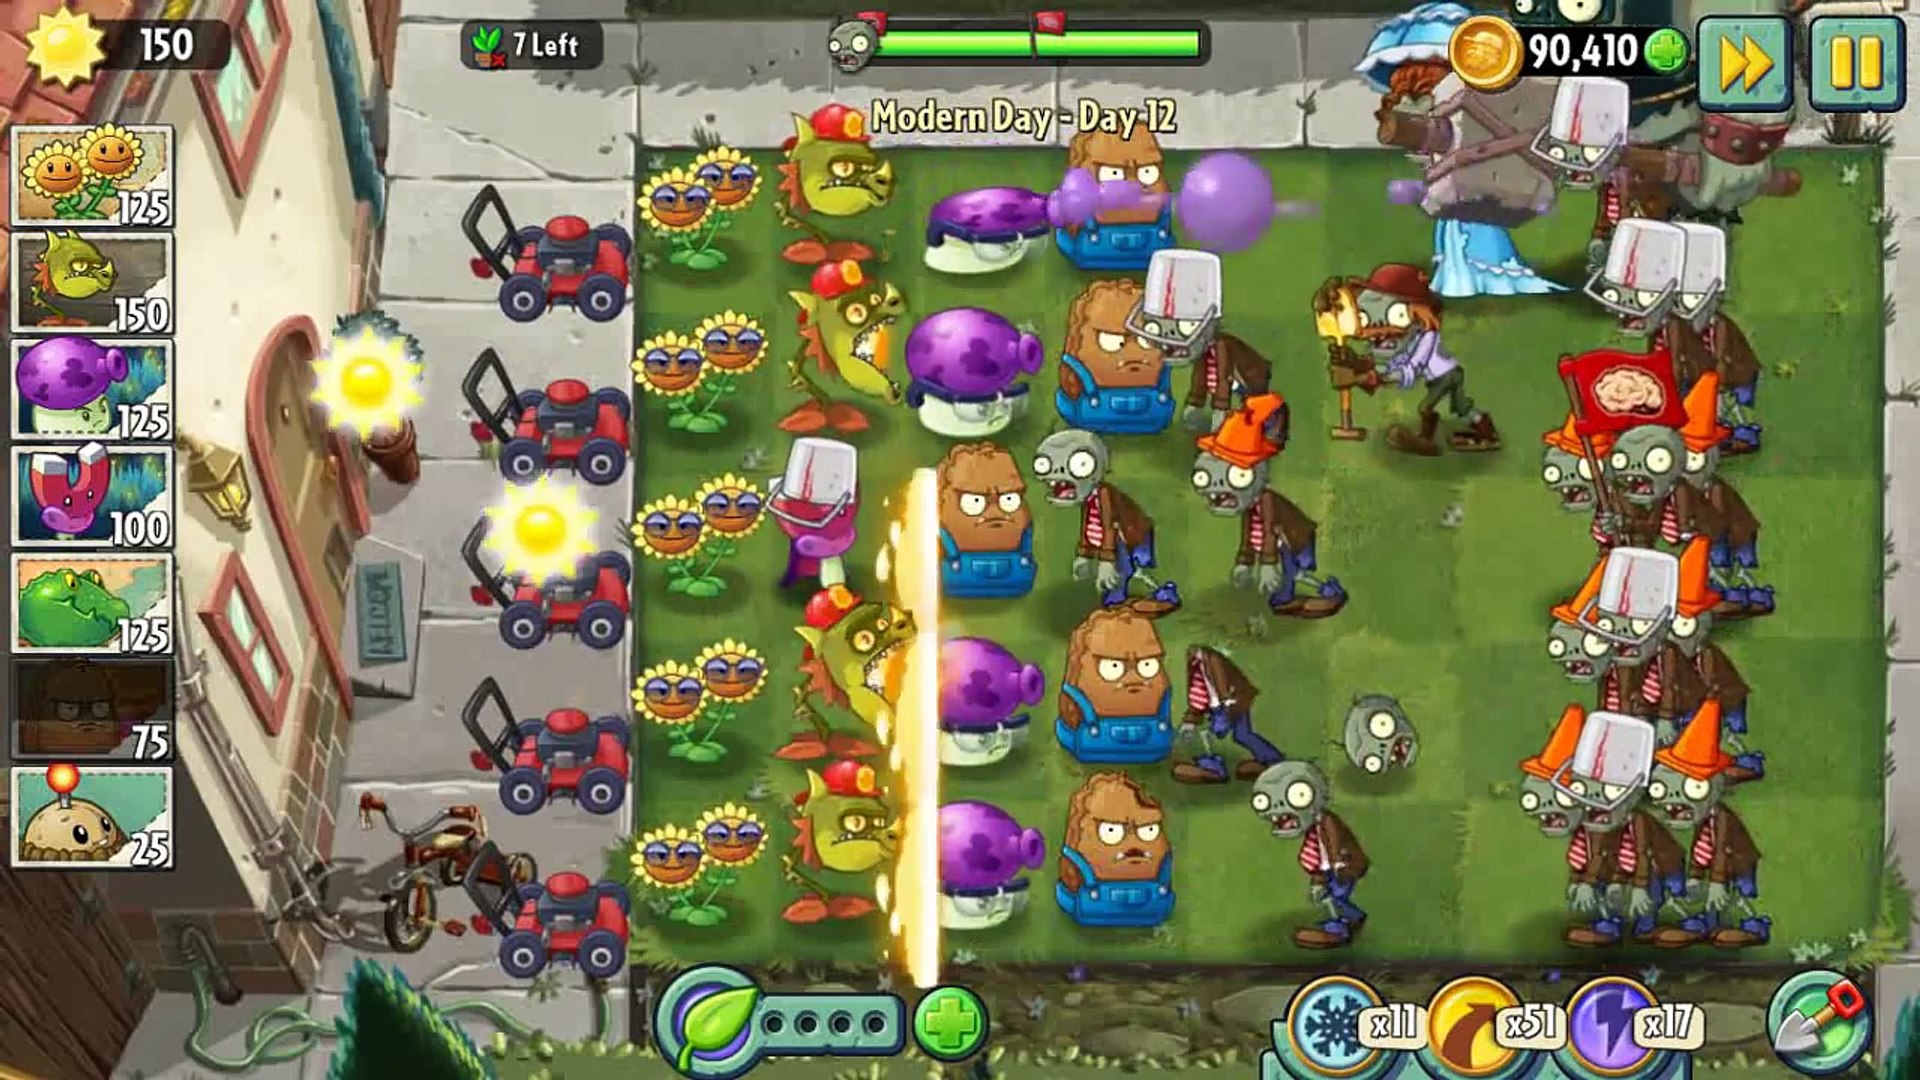 Plants vs Zombies 2 - Modern Day - Day 12 (Old Version): Dinos in